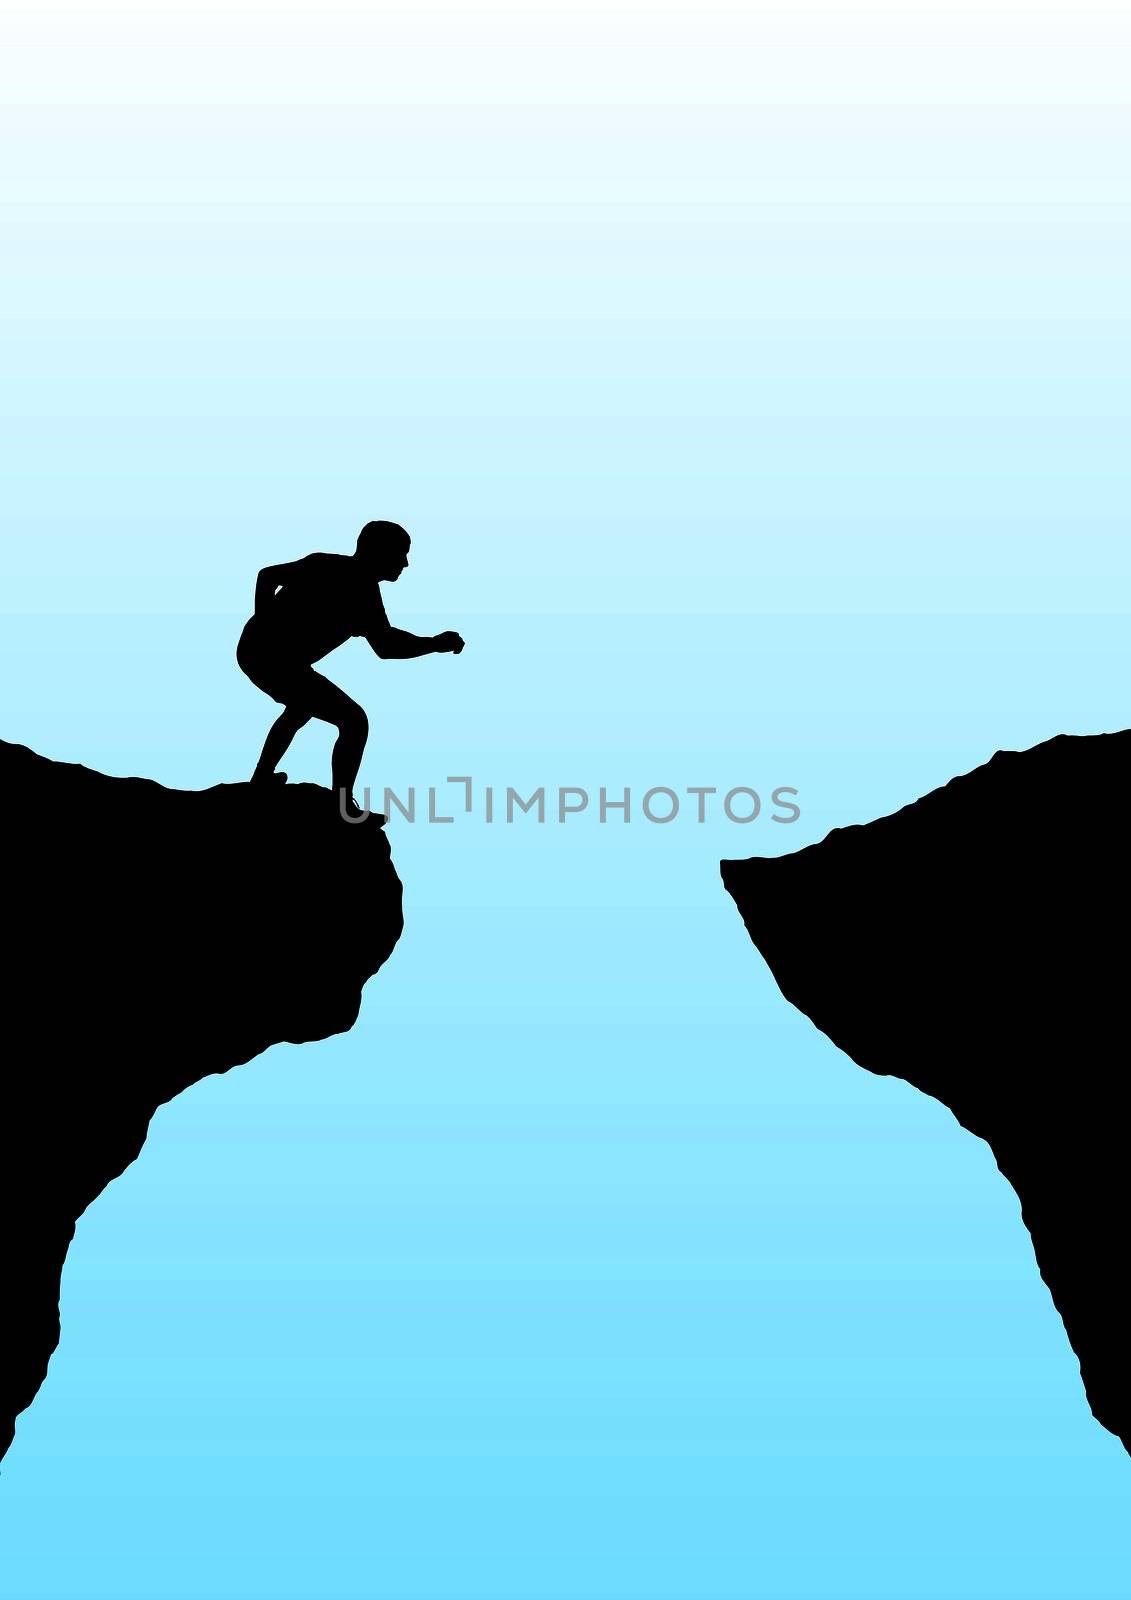 Illustration of a person getting ready to jump a gorge